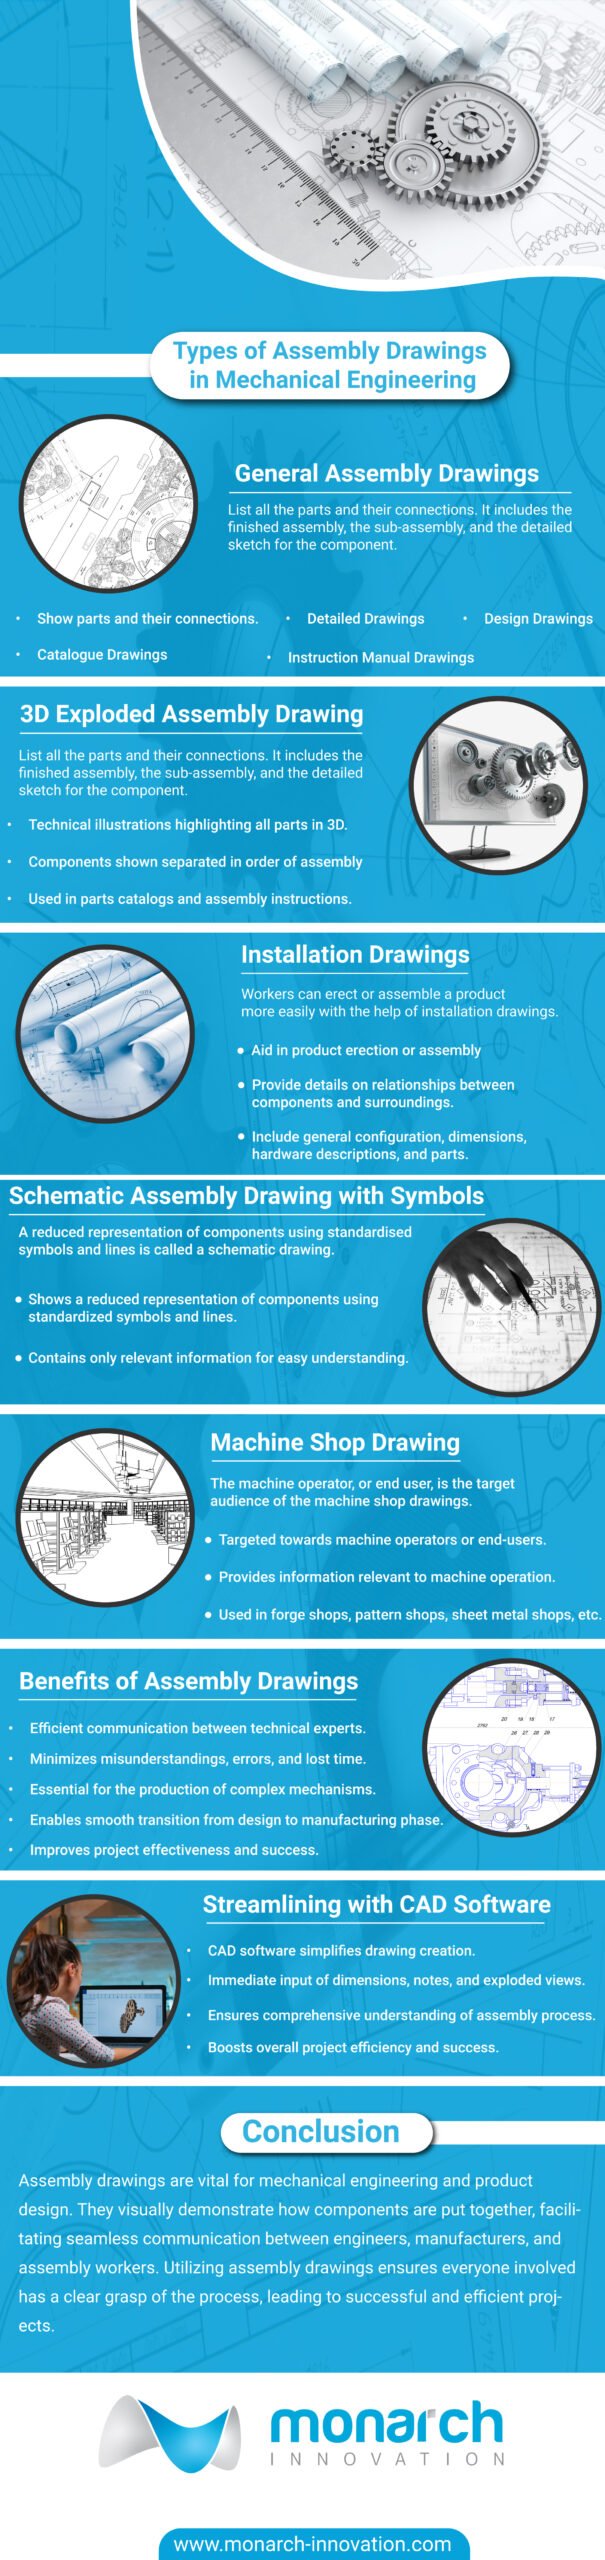 Types of assembly drawings in Mechanical Engineering